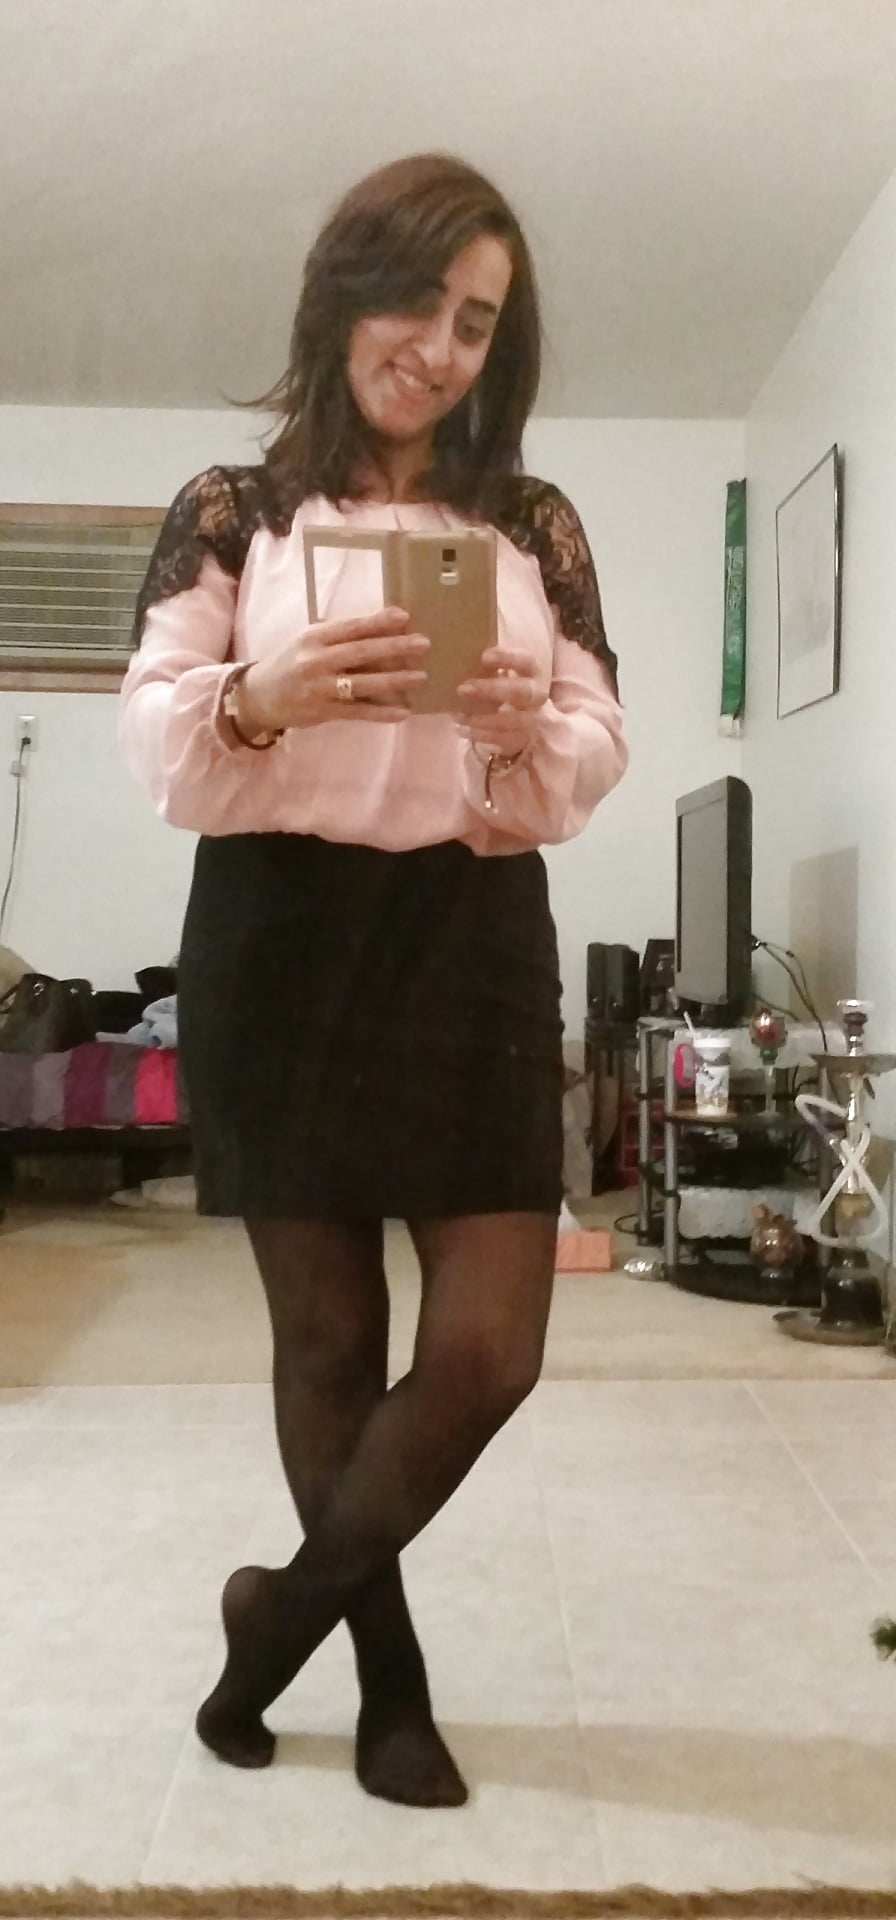 Me (Saudi Arab) in a skirt showing some leg in nylons (7/9)